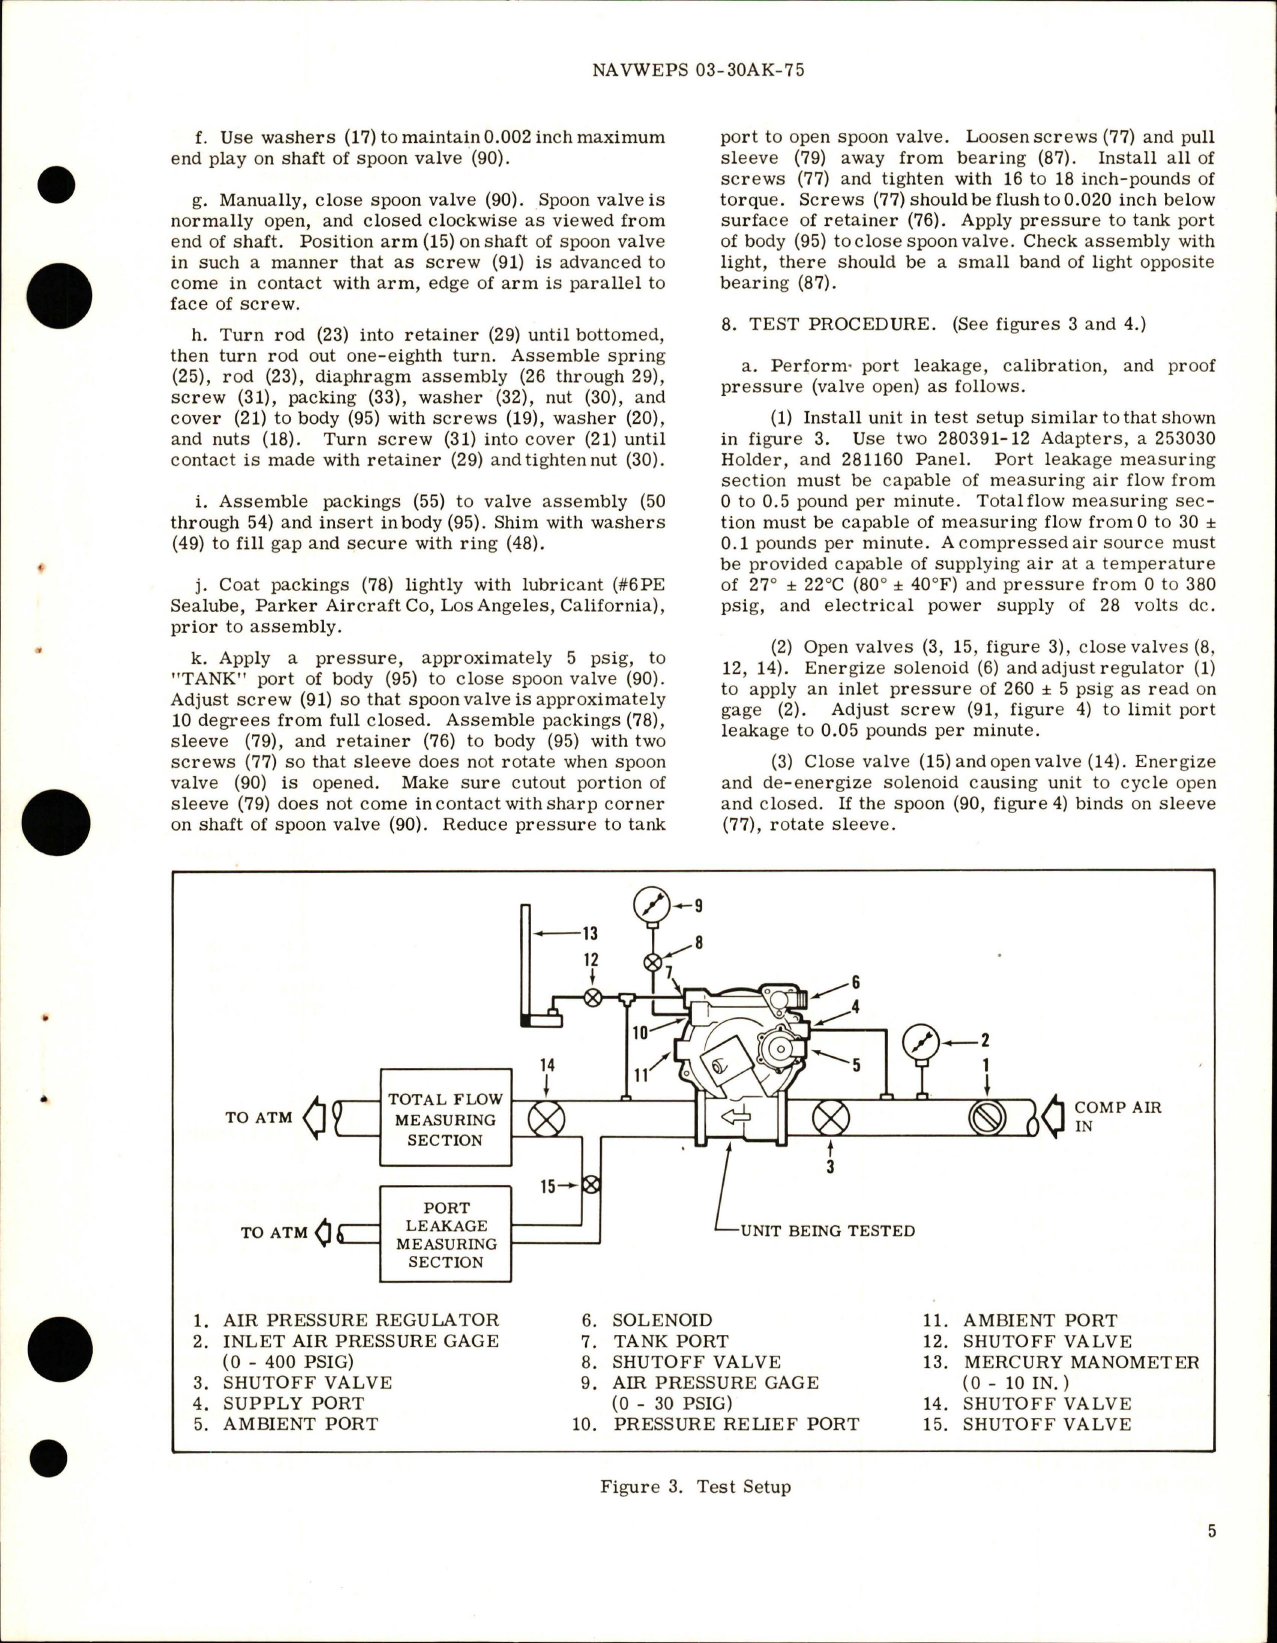 Sample page 7 from AirCorps Library document: Overhaul Instructions with Parts Breakdown for Air Pressure Regulators - Parts 108388, and 108388-1-1 